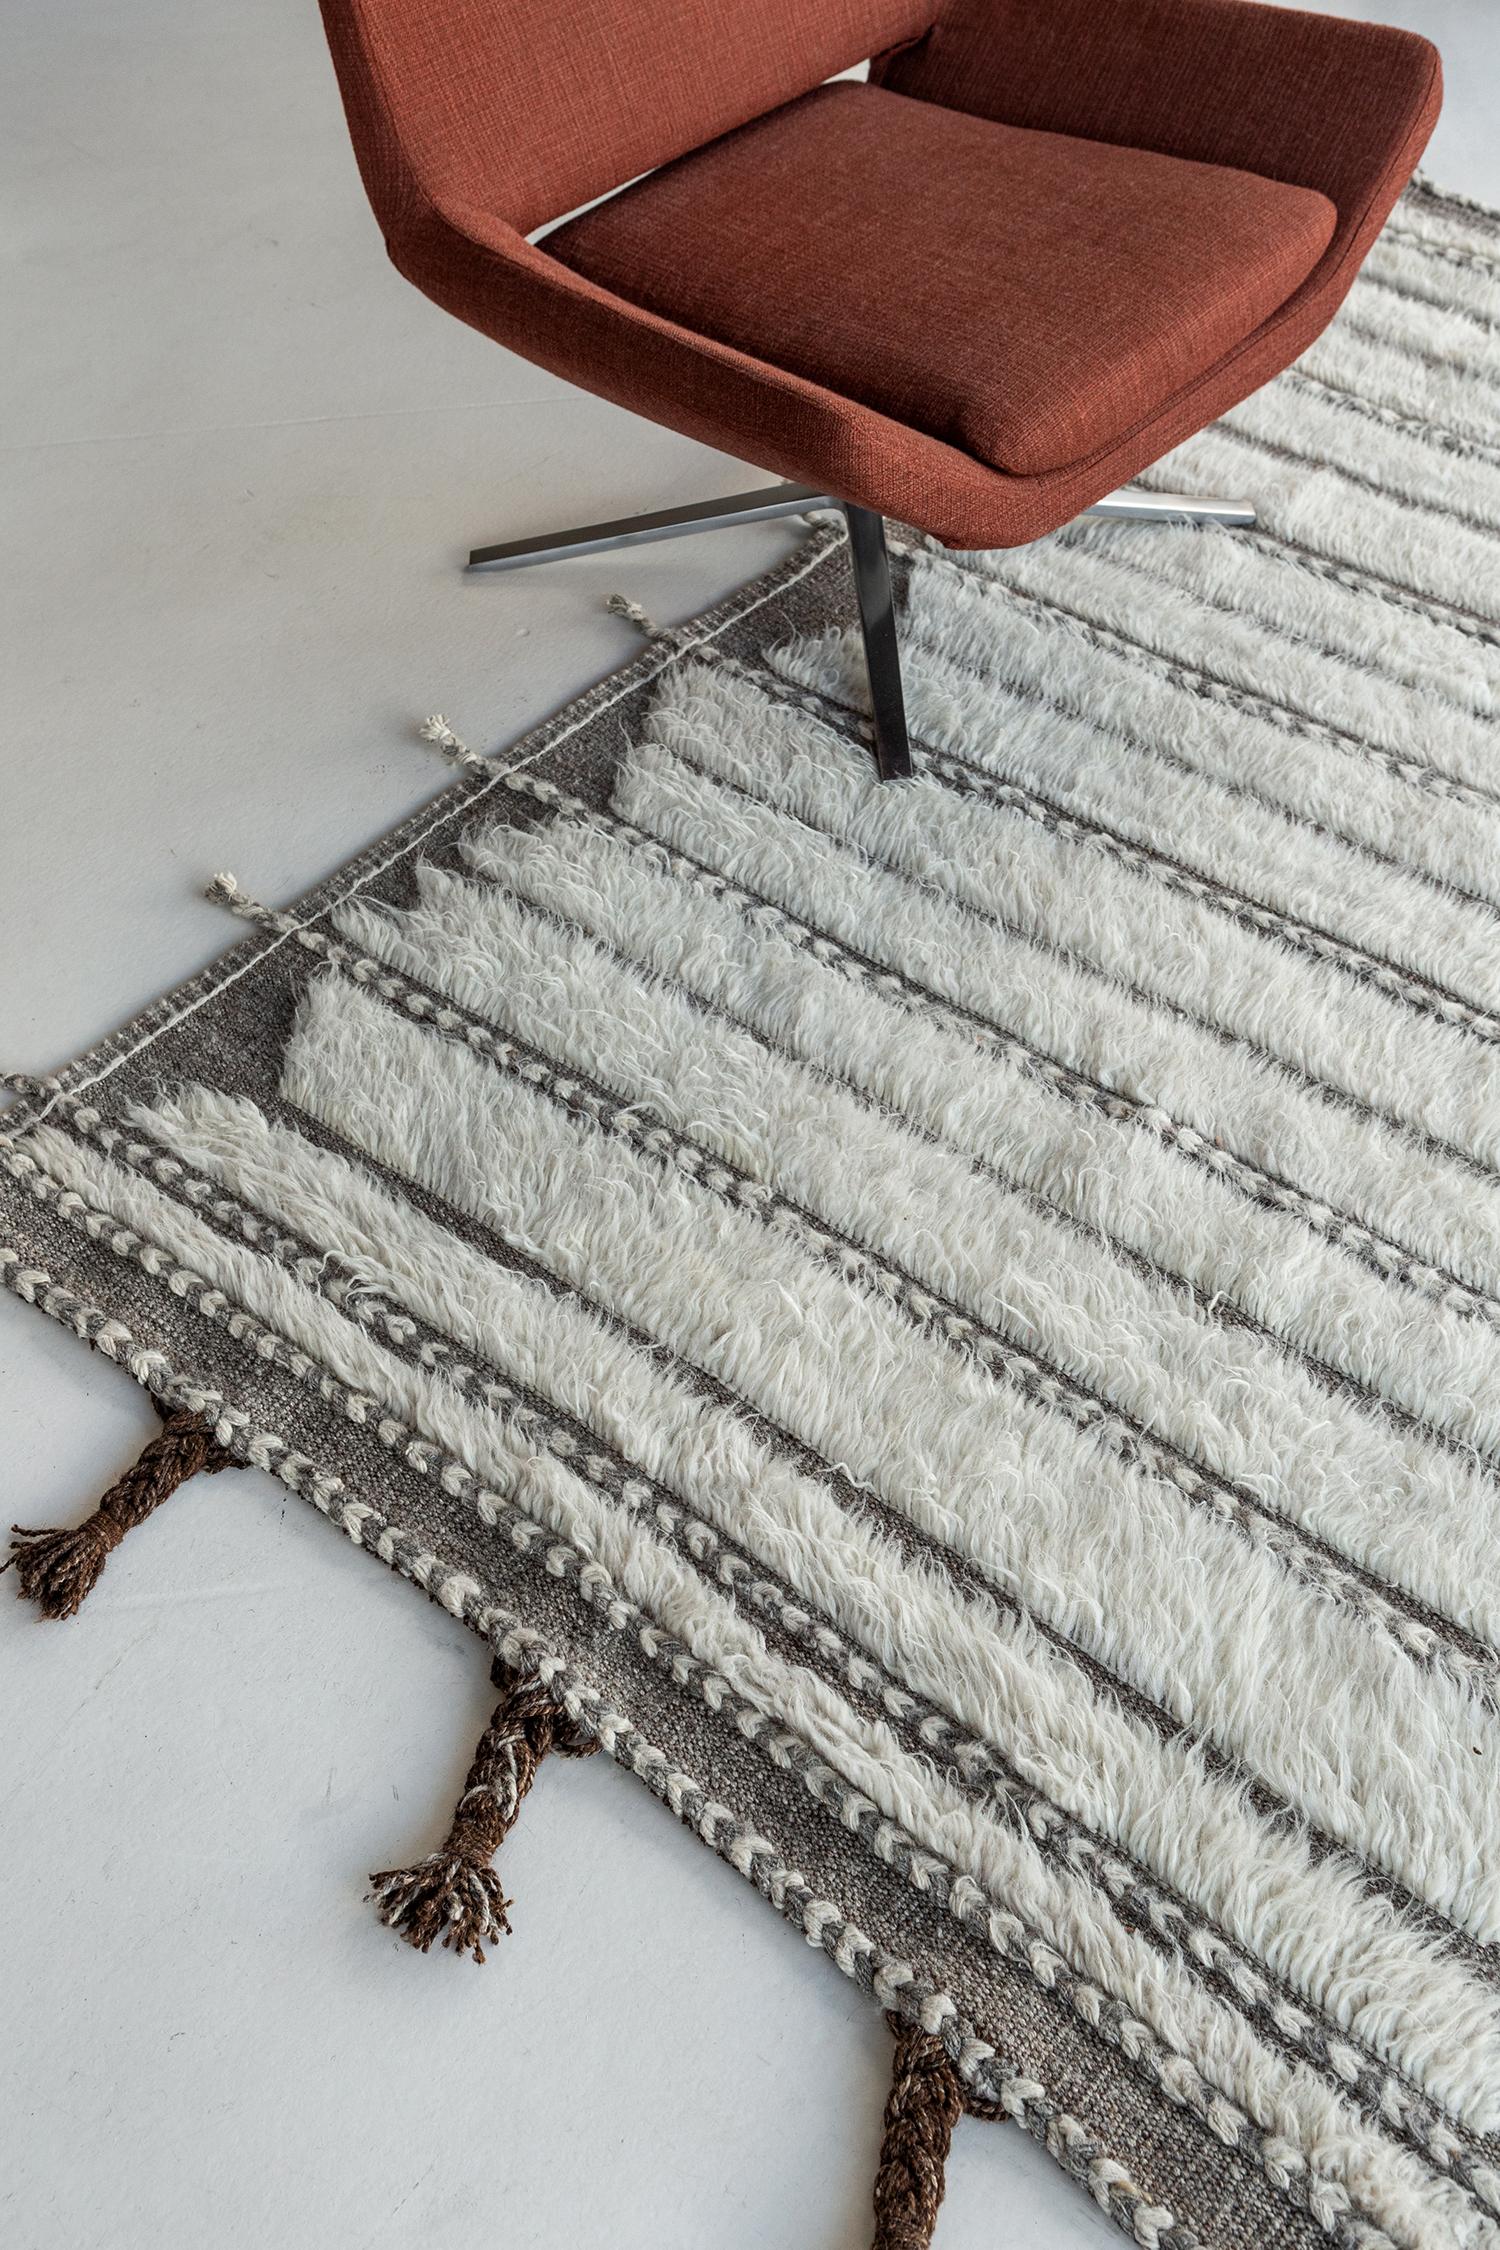 Abrolhos' is a handwoven luxurious wool rug with timeless embossed detailing. In addition to its perfect ivory flat weave, Albrohos has a beautiful shag that brings a lustrous texture and contemporary feel to one's space. The Haute Bohemian